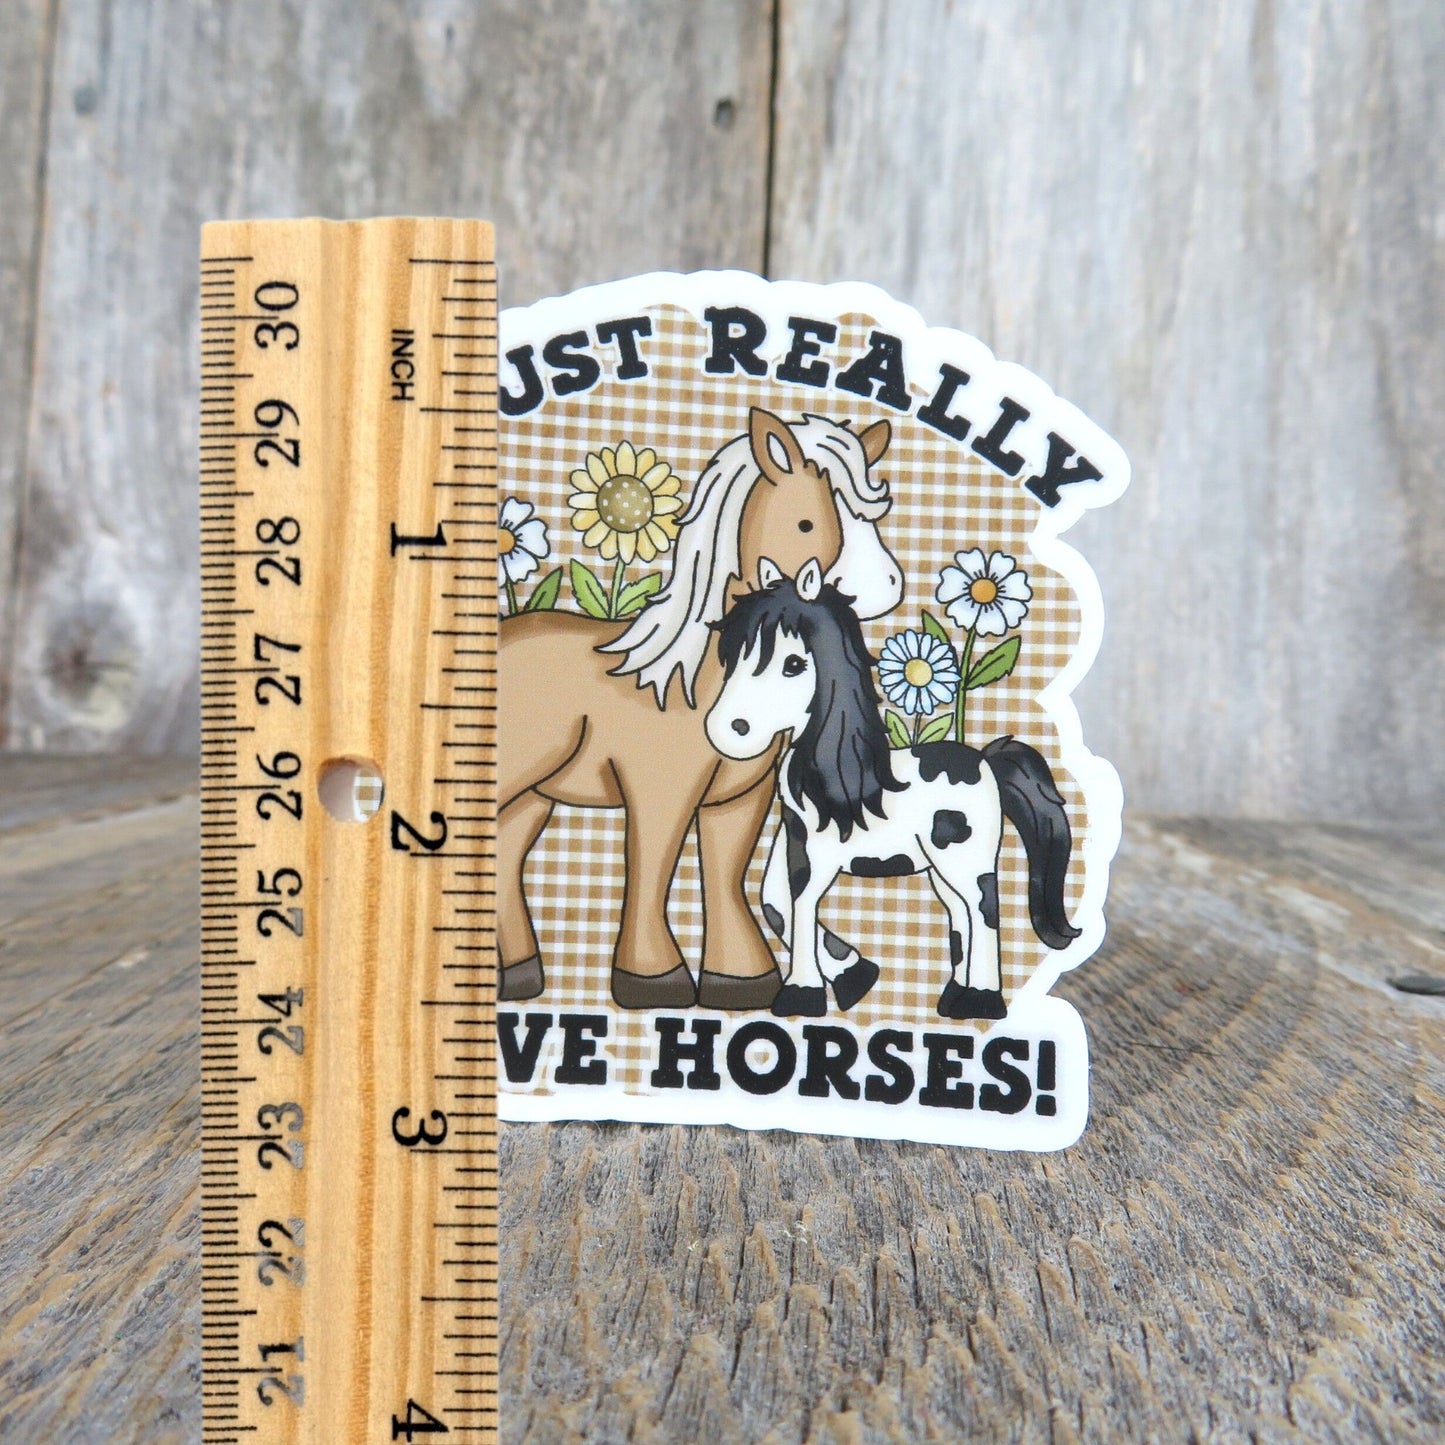 I Just Really Love Horses Sticker Waterproof Full Color Gingham Equestrian Horse Riding